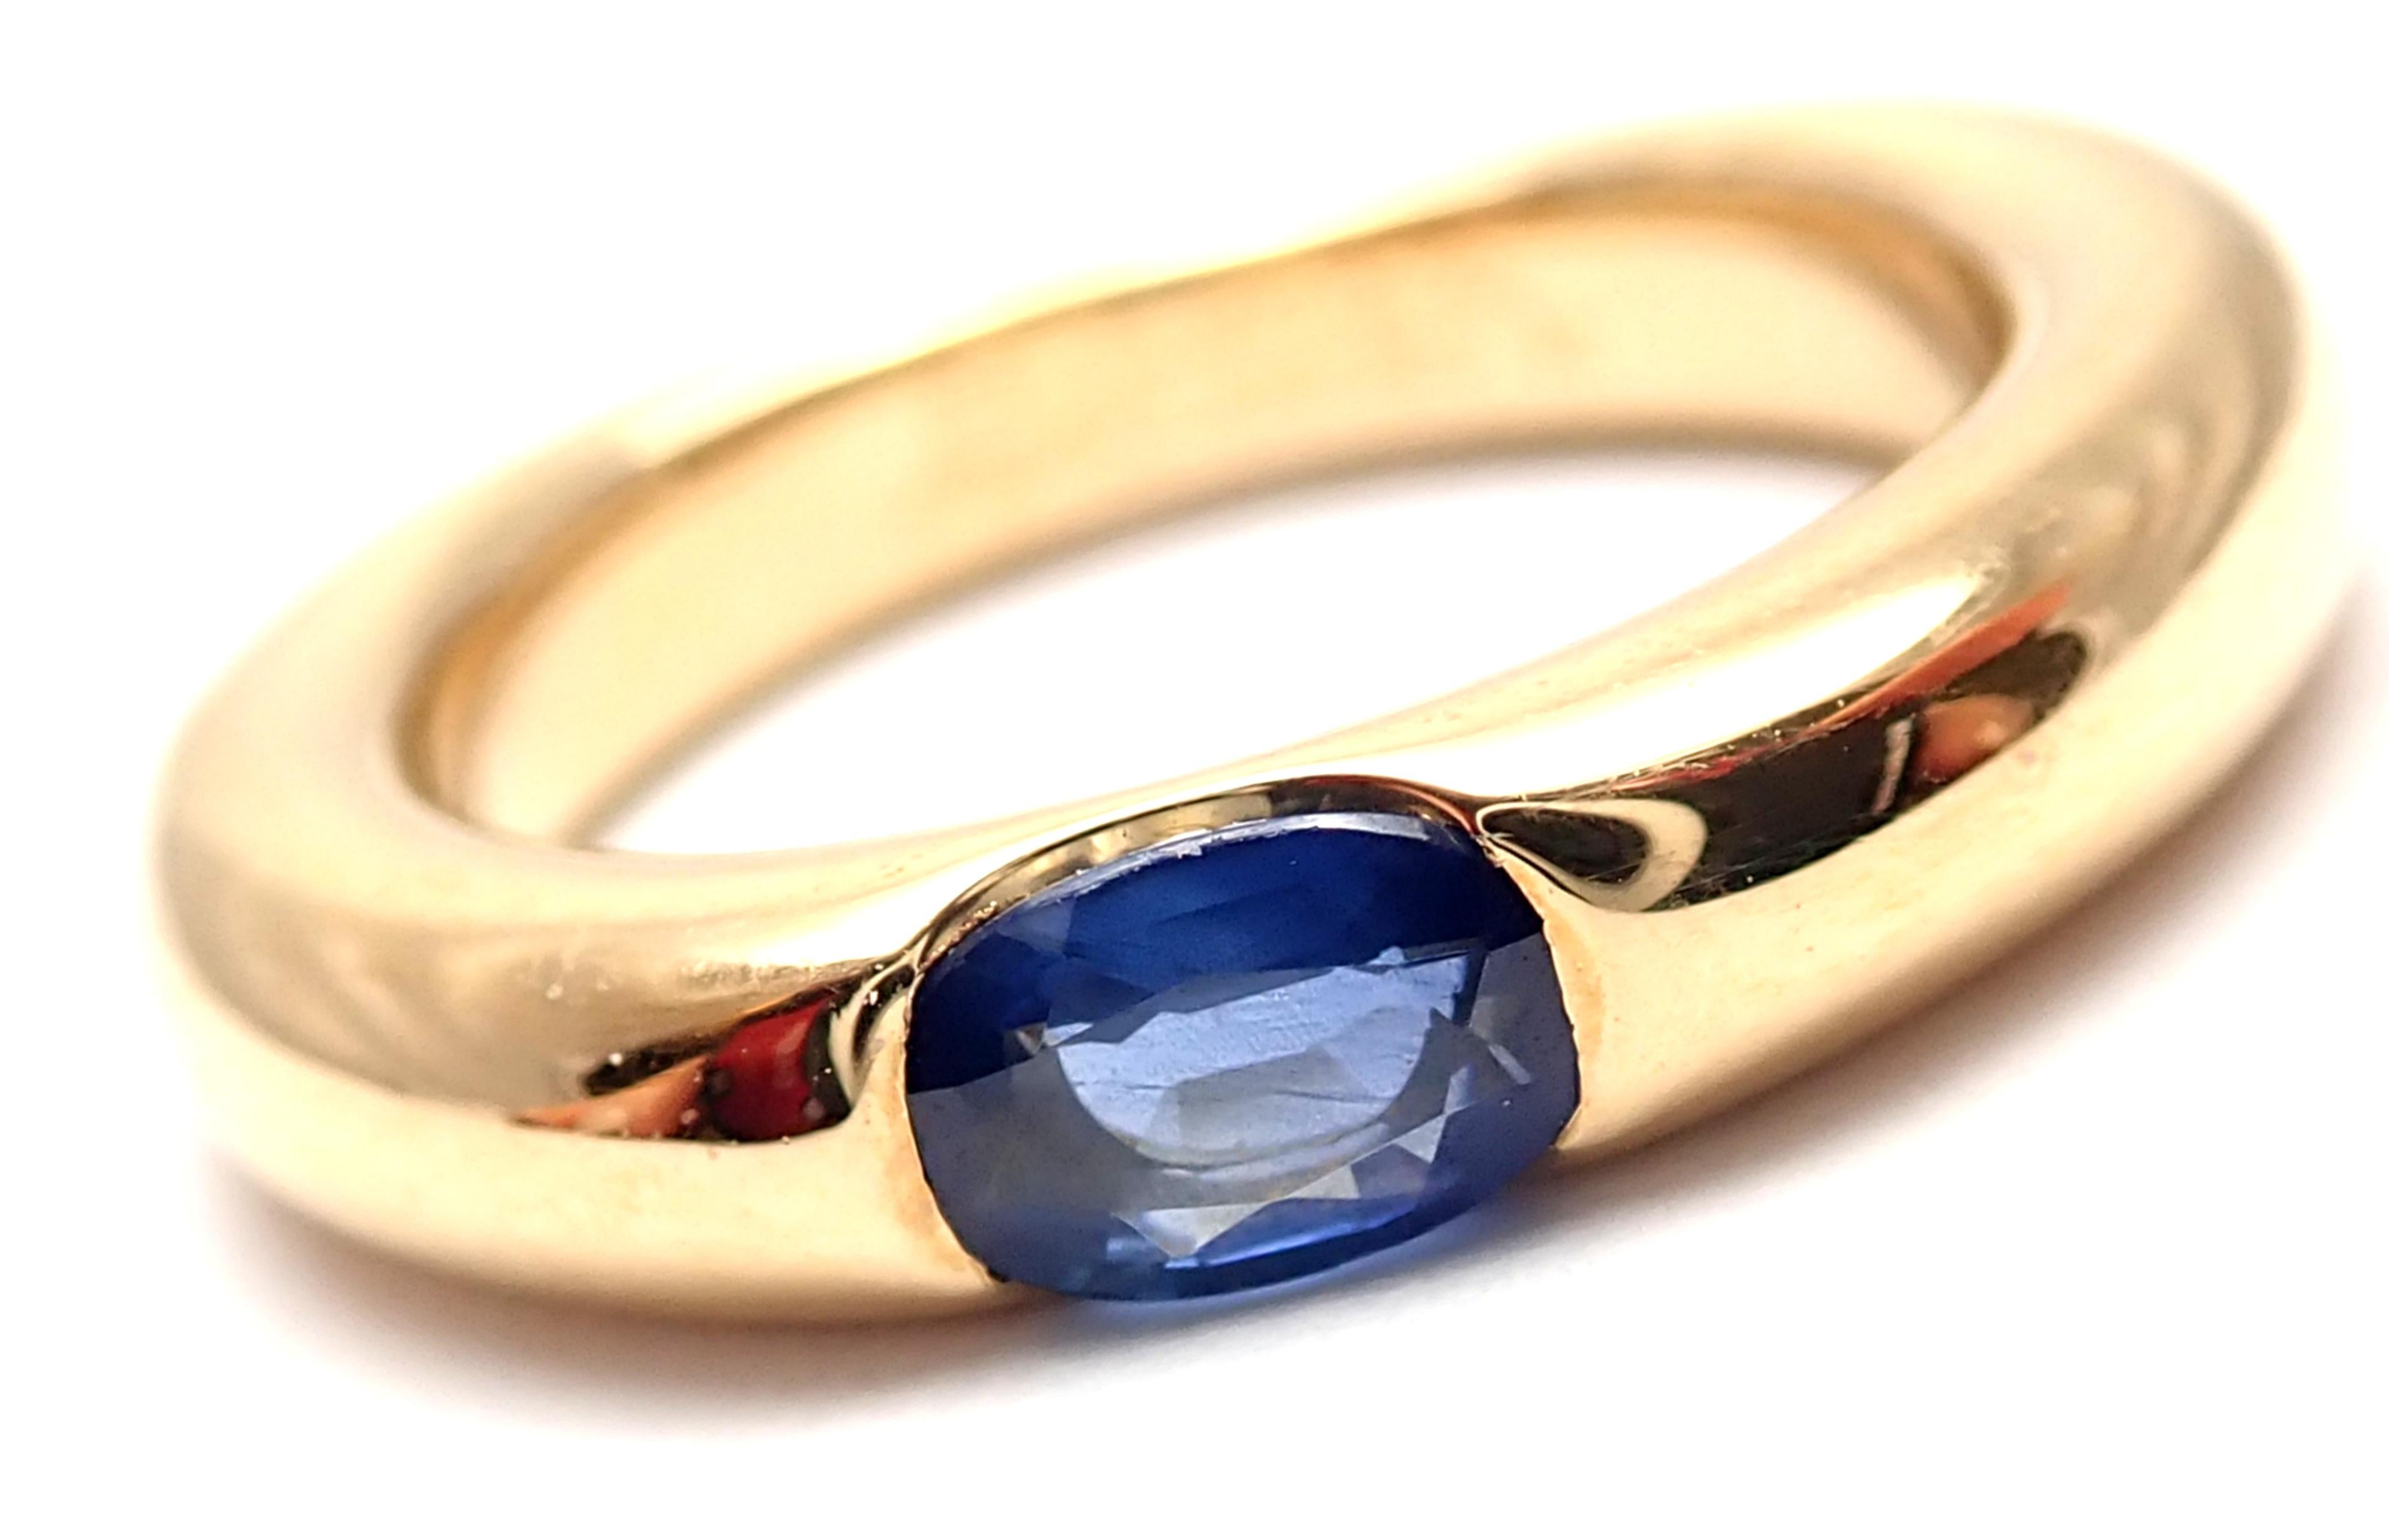 18k Yellow Gold Ellipse Sapphire Band Ring by Cartier.
With 1 oval-shaped beautiful sapphire 5mm x 4mm.
Details:
Width: 4mm
Weight: 8.2 grams
Ring Size: European 49, US 4 3/4
Stamped Hallmarks: Cartier 750 49 1992 D 083907
*Free Shipping within the